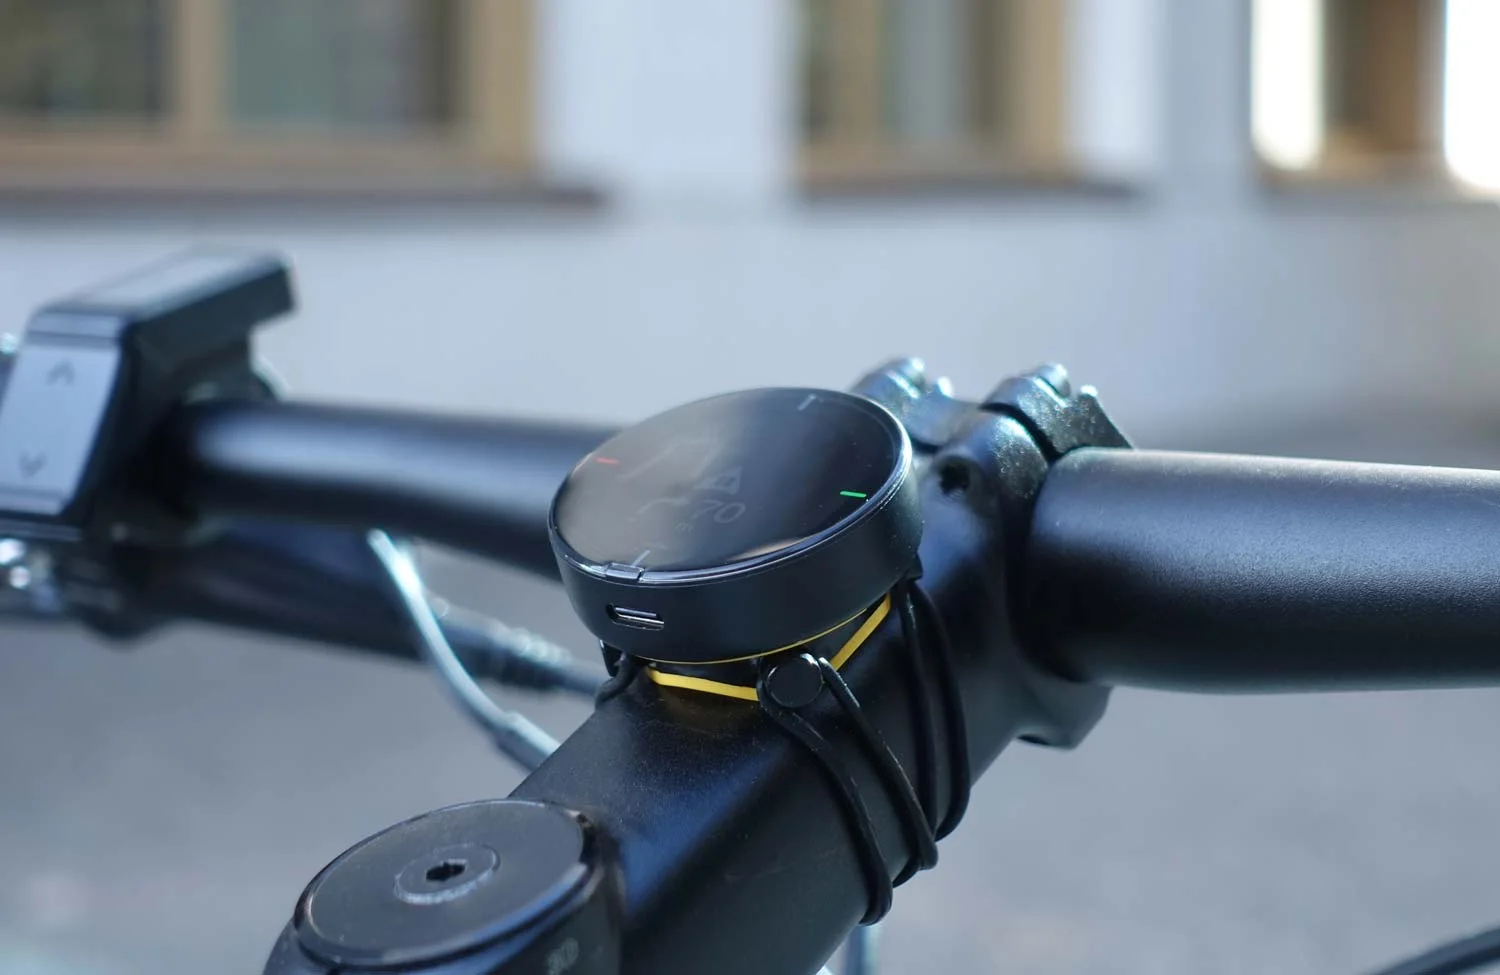 Beeline launches Velo 2 navigation device with improved simple, safe  routing options